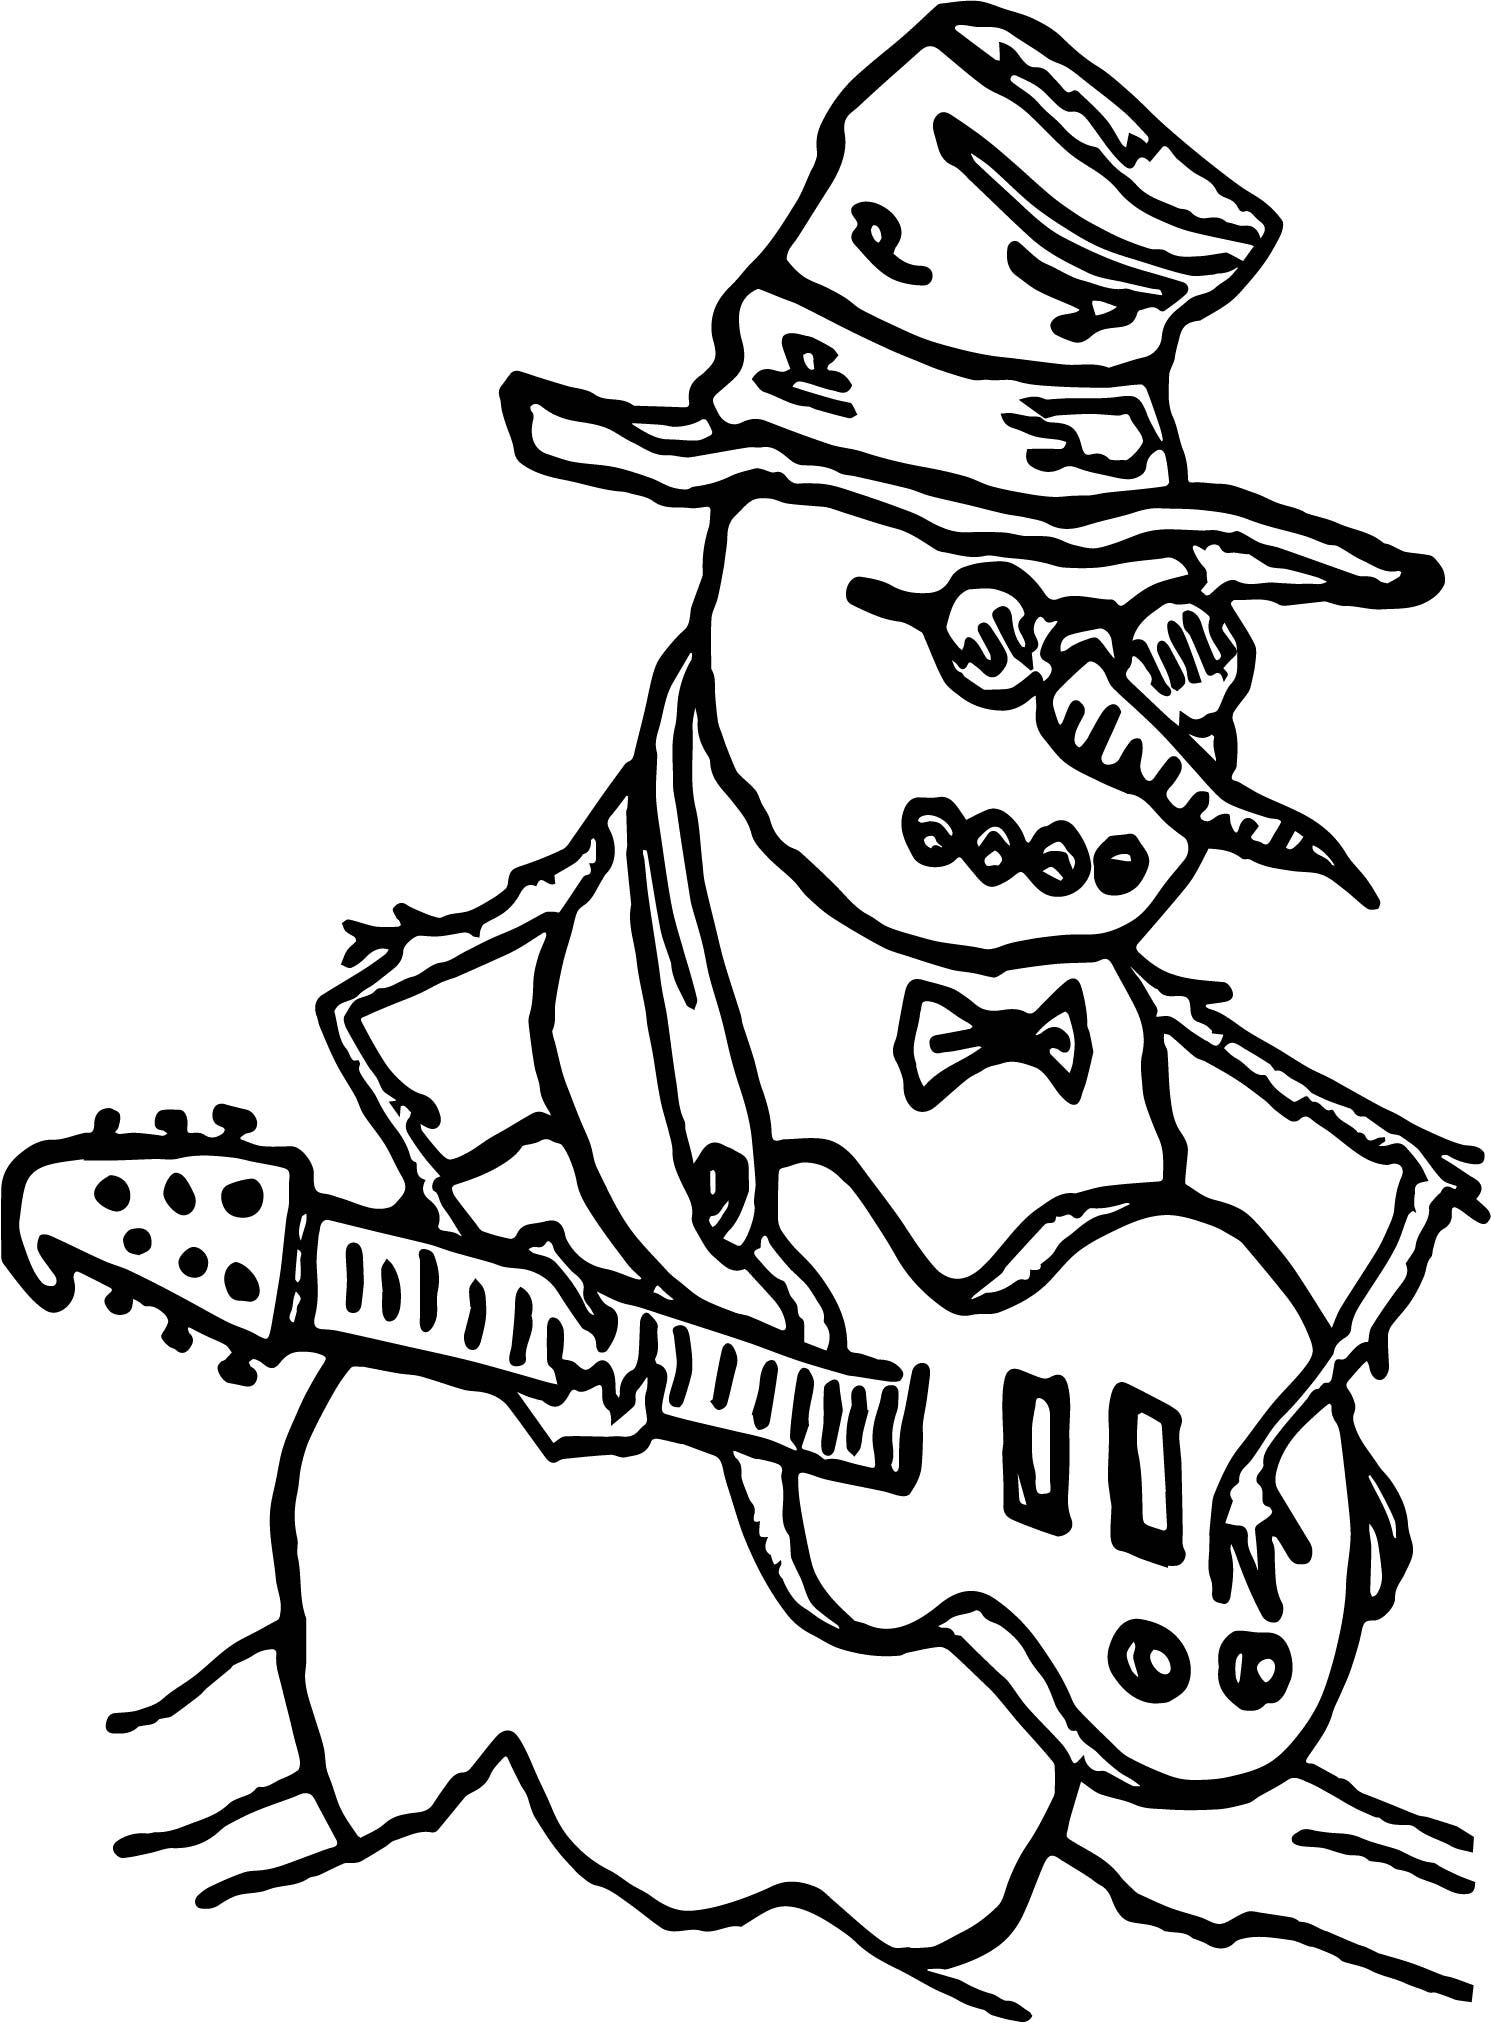 Snowmen The Guitar Player Coloring Page